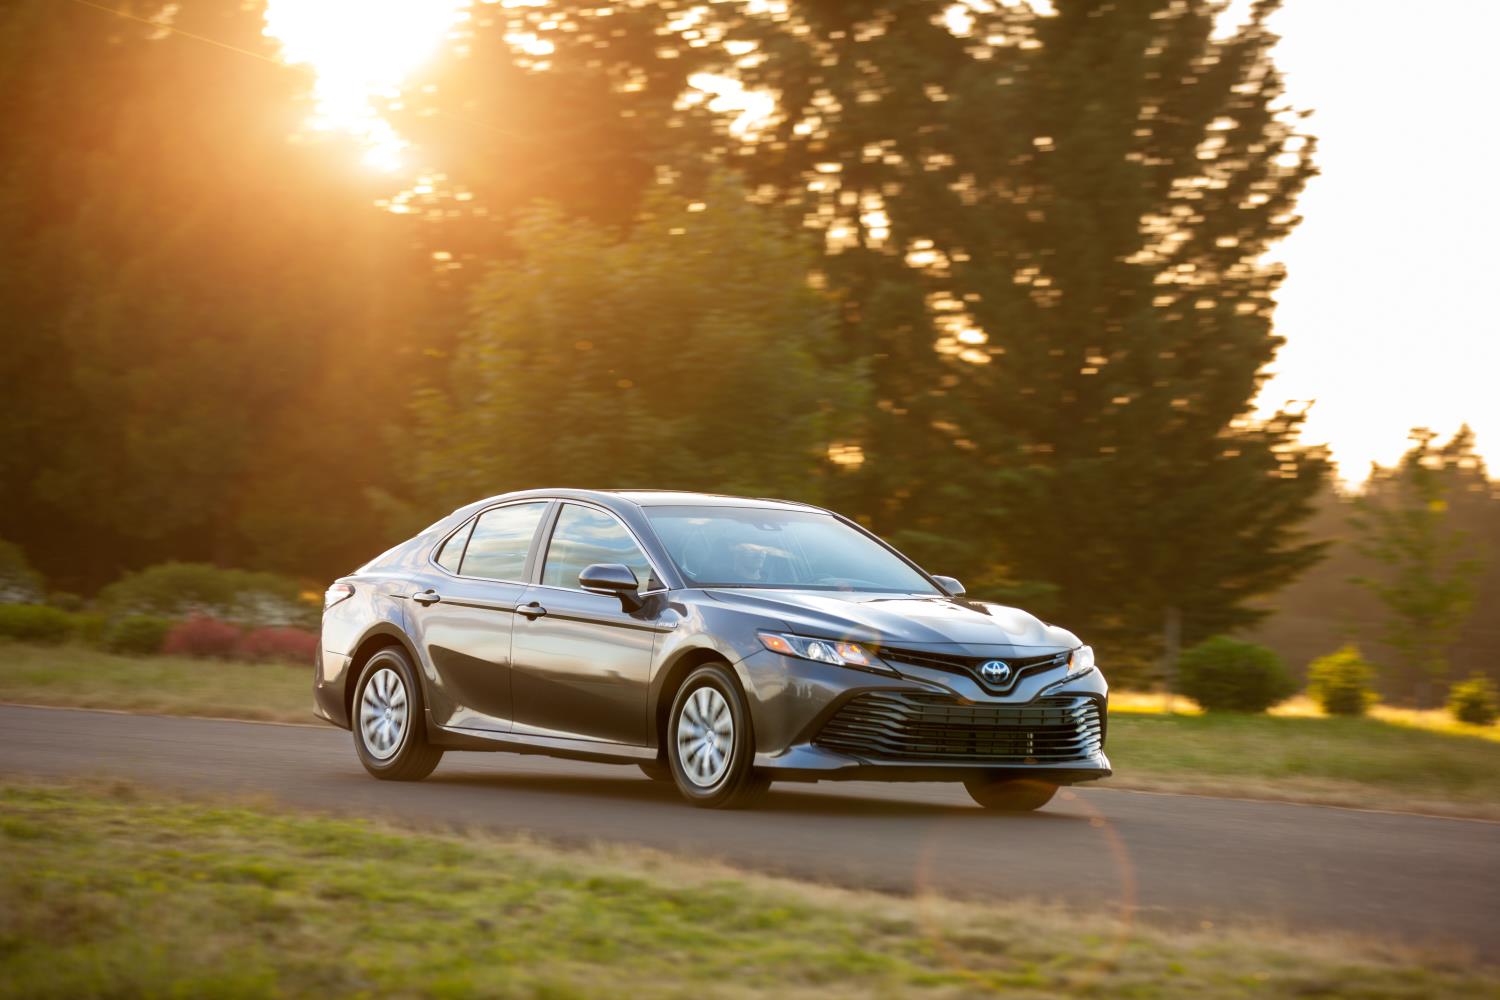 2018 Toyota Camry Rolls Into Dealers This Summer From $23,495 ...
